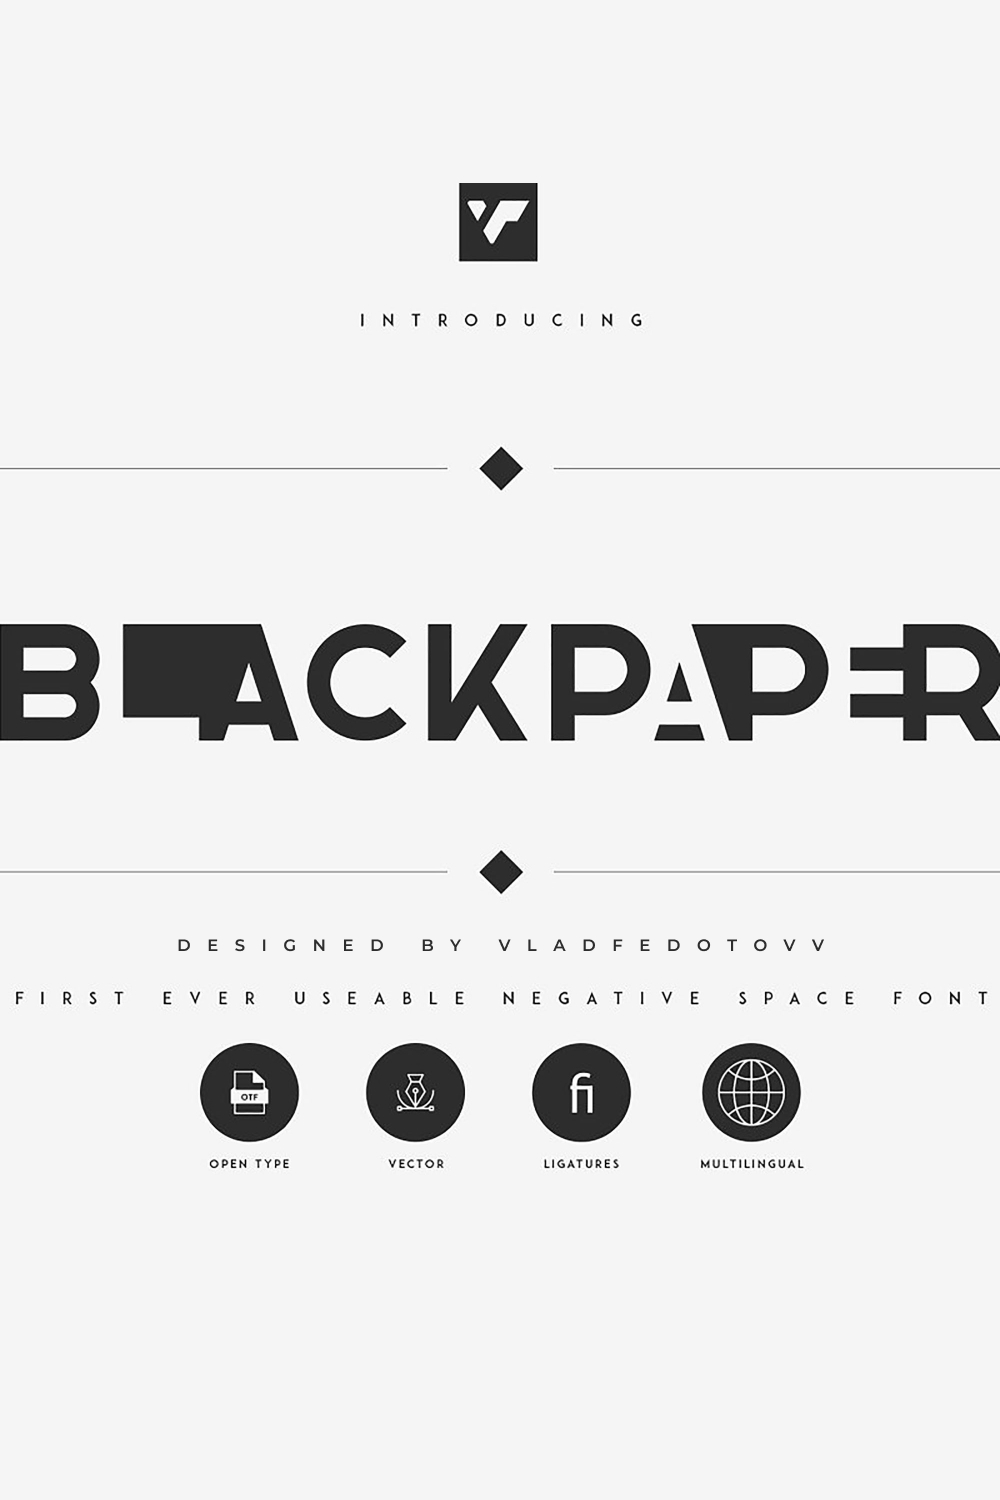  Blackpaper – 1st Negative Space Font preview image for Pinterest.